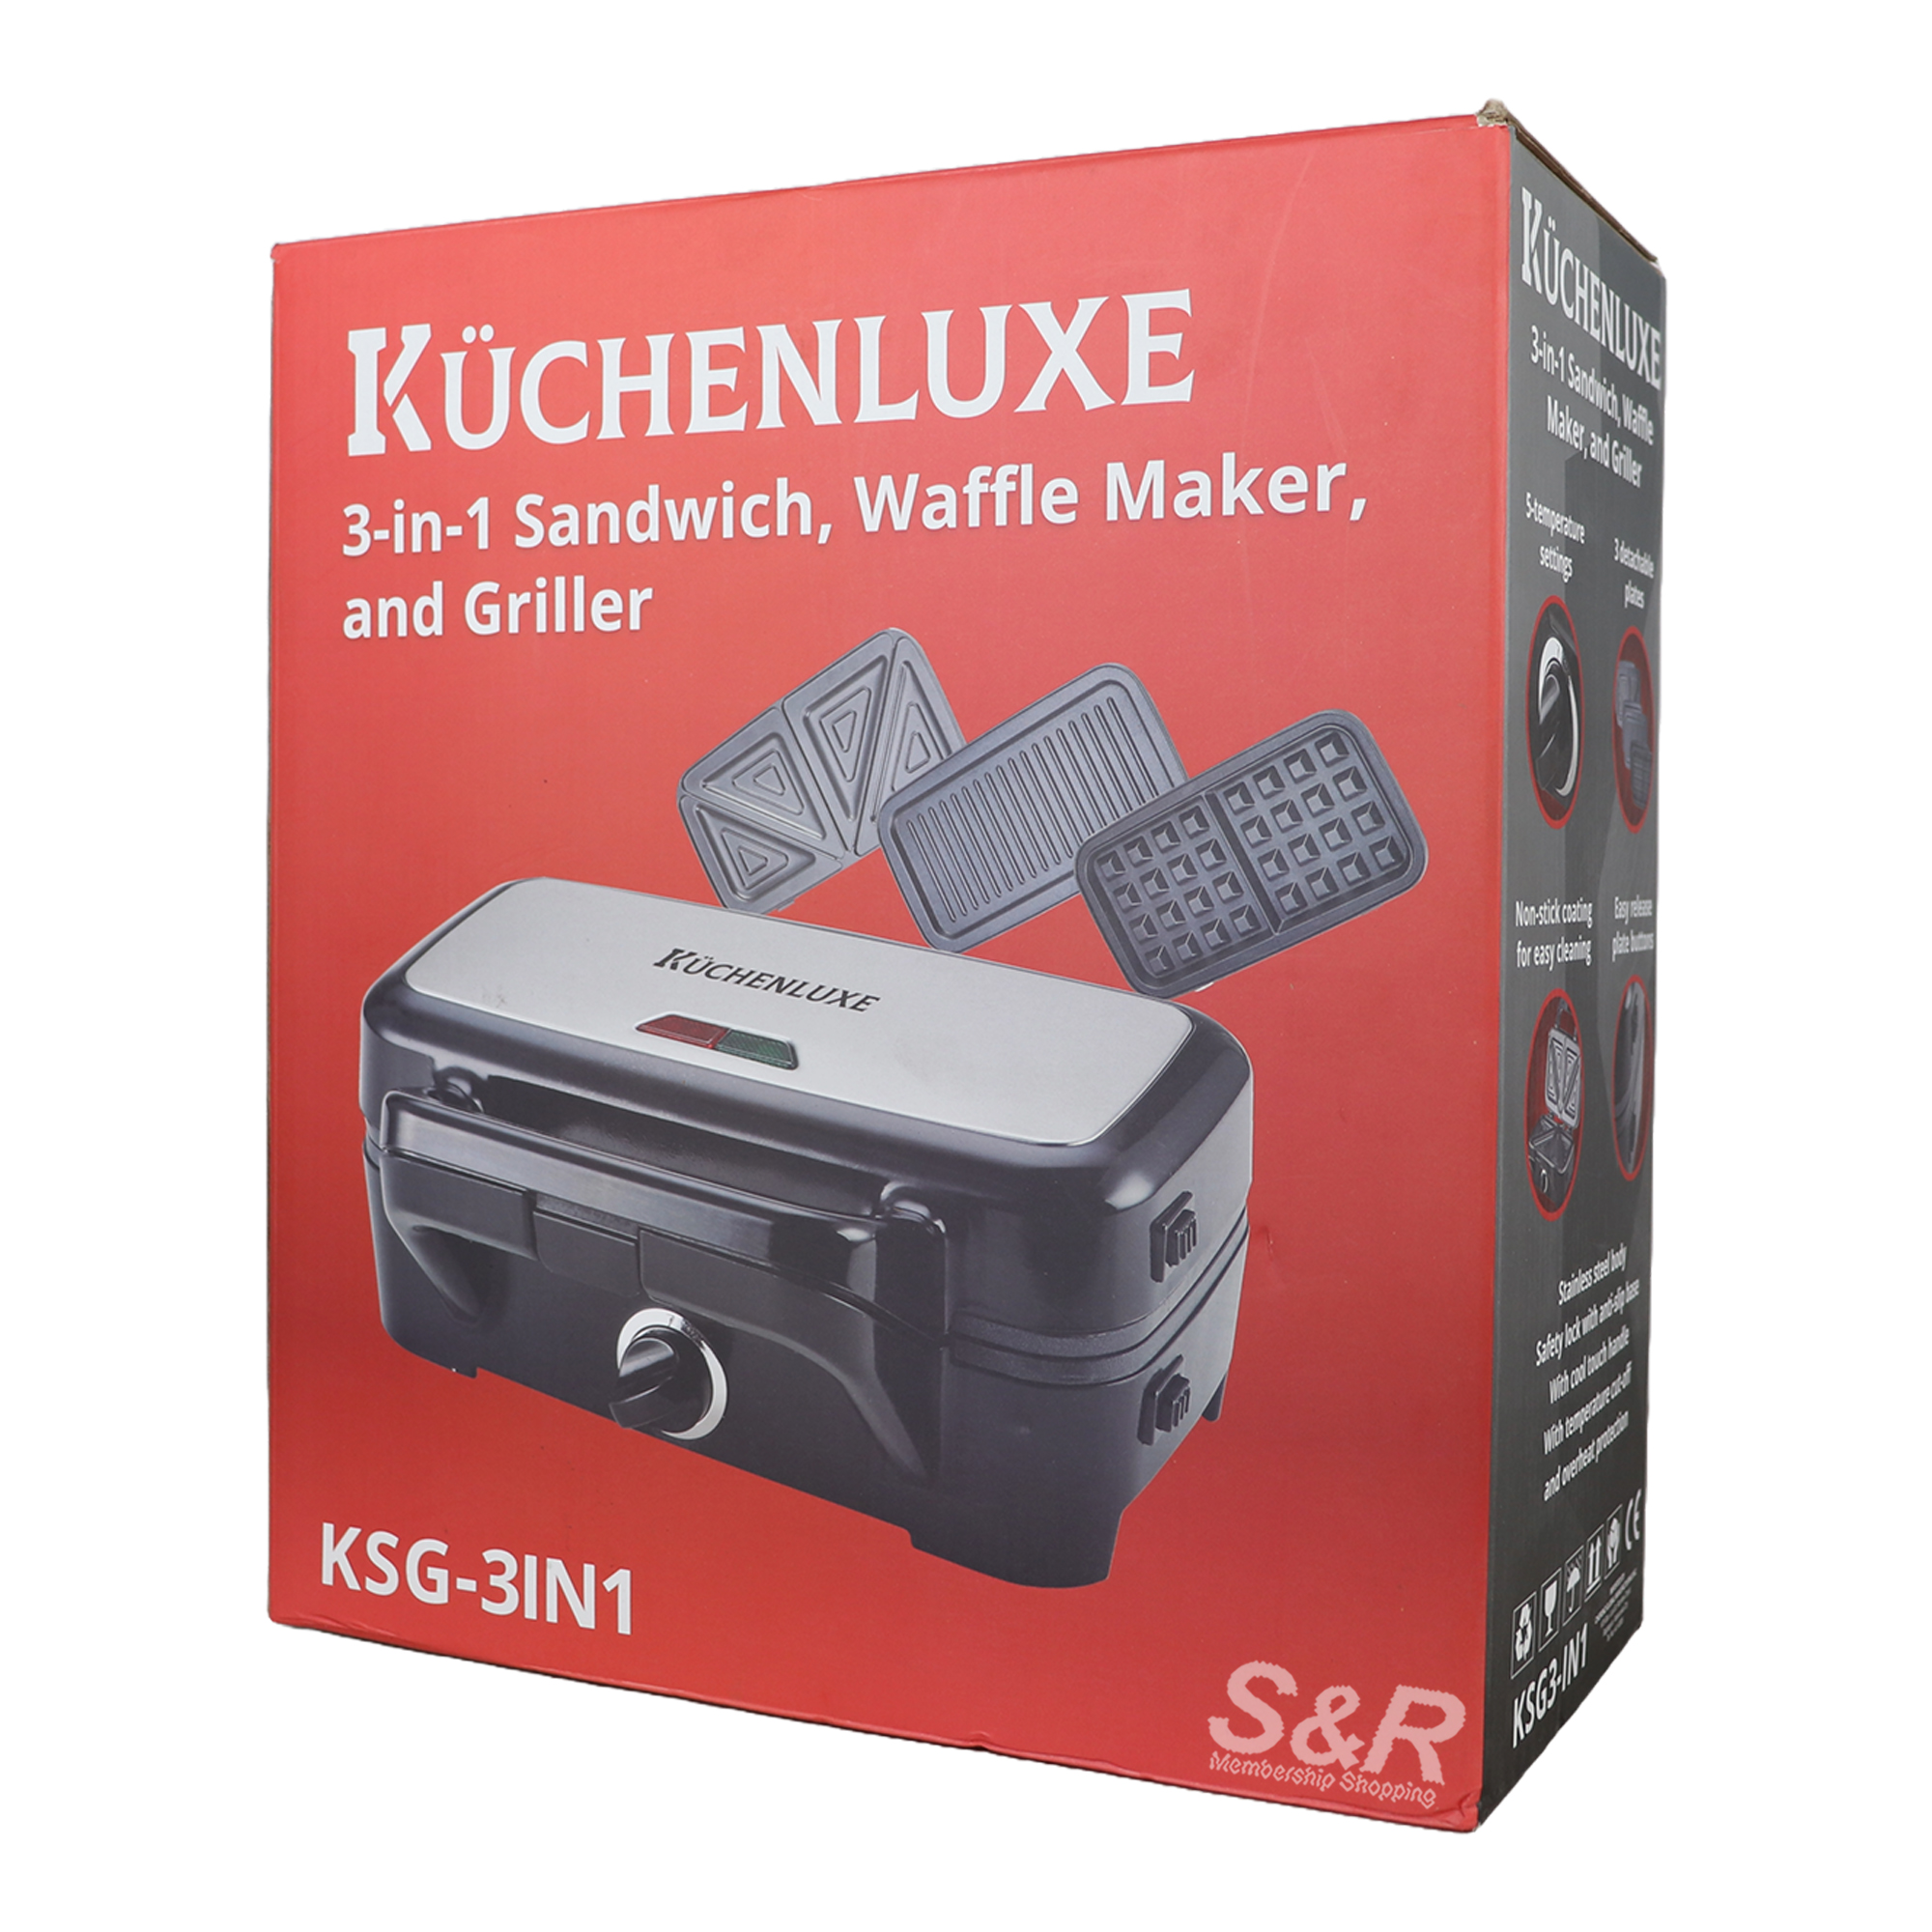 Kuchenluxe 3-in-1 Sandwich, Waffle Maker, and Griller KSG-3IN1